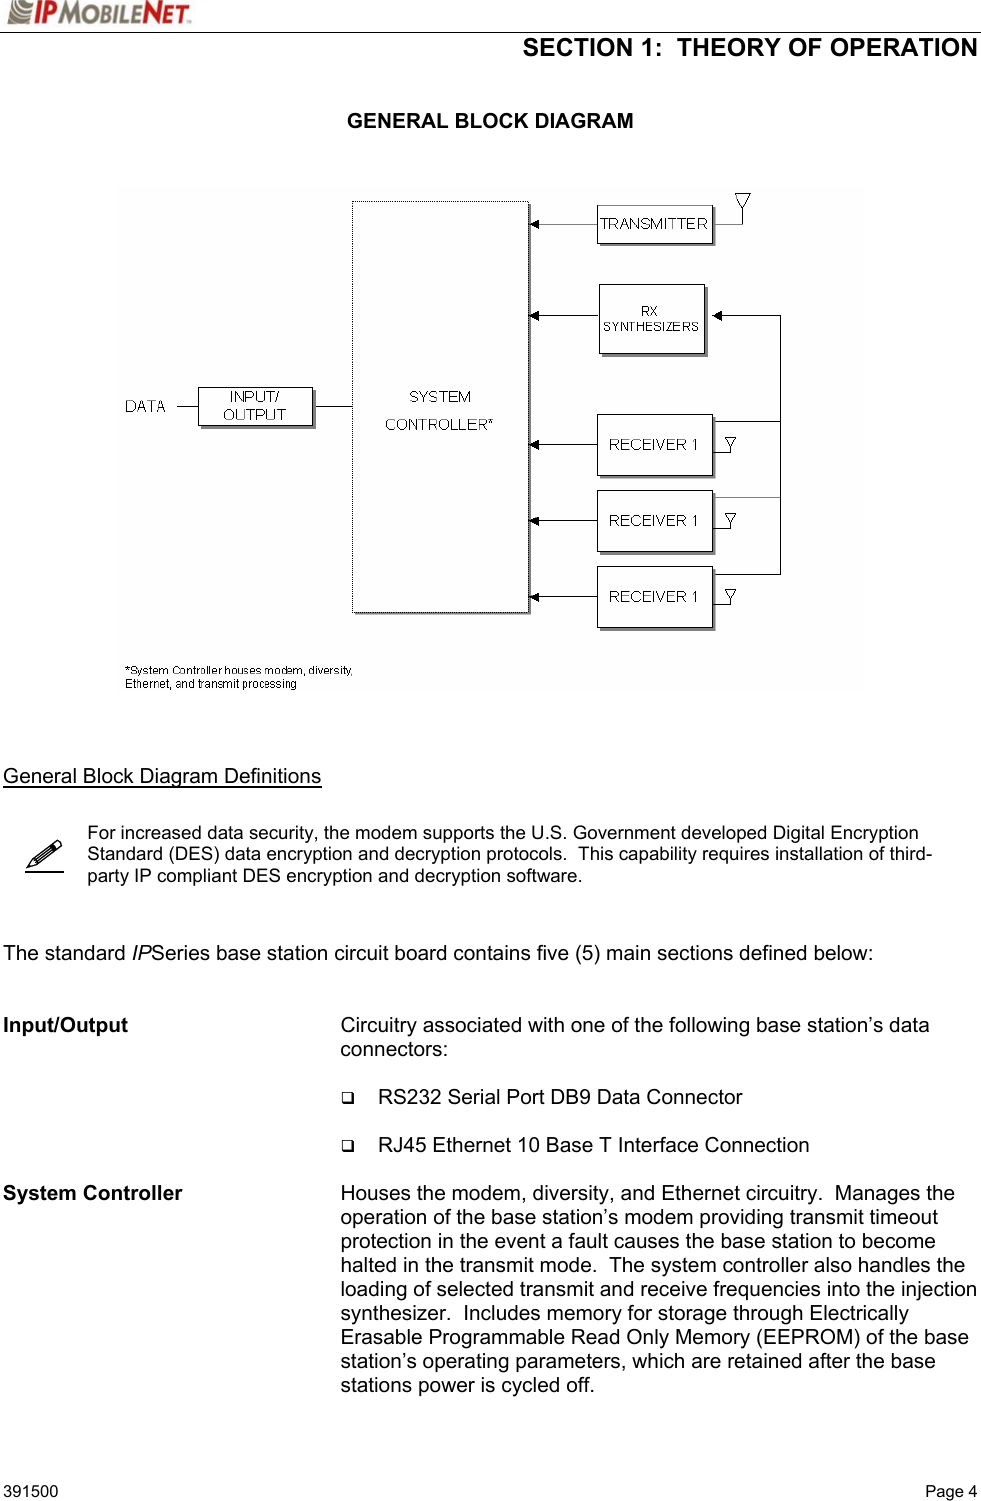  SECTION 1:  THEORY OF OPERATION   391500   Page 4   GENERAL BLOCK DIAGRAM       General Block Diagram Definitions     For increased data security, the modem supports the U.S. Government developed Digital Encryption Standard (DES) data encryption and decryption protocols.  This capability requires installation of third-party IP compliant DES encryption and decryption software.    The standard IPSeries base station circuit board contains five (5) main sections defined below:   Input/Output    Circuitry associated with one of the following base station’s data connectors:   RS232 Serial Port DB9 Data Connector   RJ45 Ethernet 10 Base T Interface Connection  System Controller    Houses the modem, diversity, and Ethernet circuitry.  Manages the operation of the base station’s modem providing transmit timeout protection in the event a fault causes the base station to become halted in the transmit mode.  The system controller also handles the loading of selected transmit and receive frequencies into the injection synthesizer.  Includes memory for storage through Electrically Erasable Programmable Read Only Memory (EEPROM) of the base station’s operating parameters, which are retained after the base stations power is cycled off.   